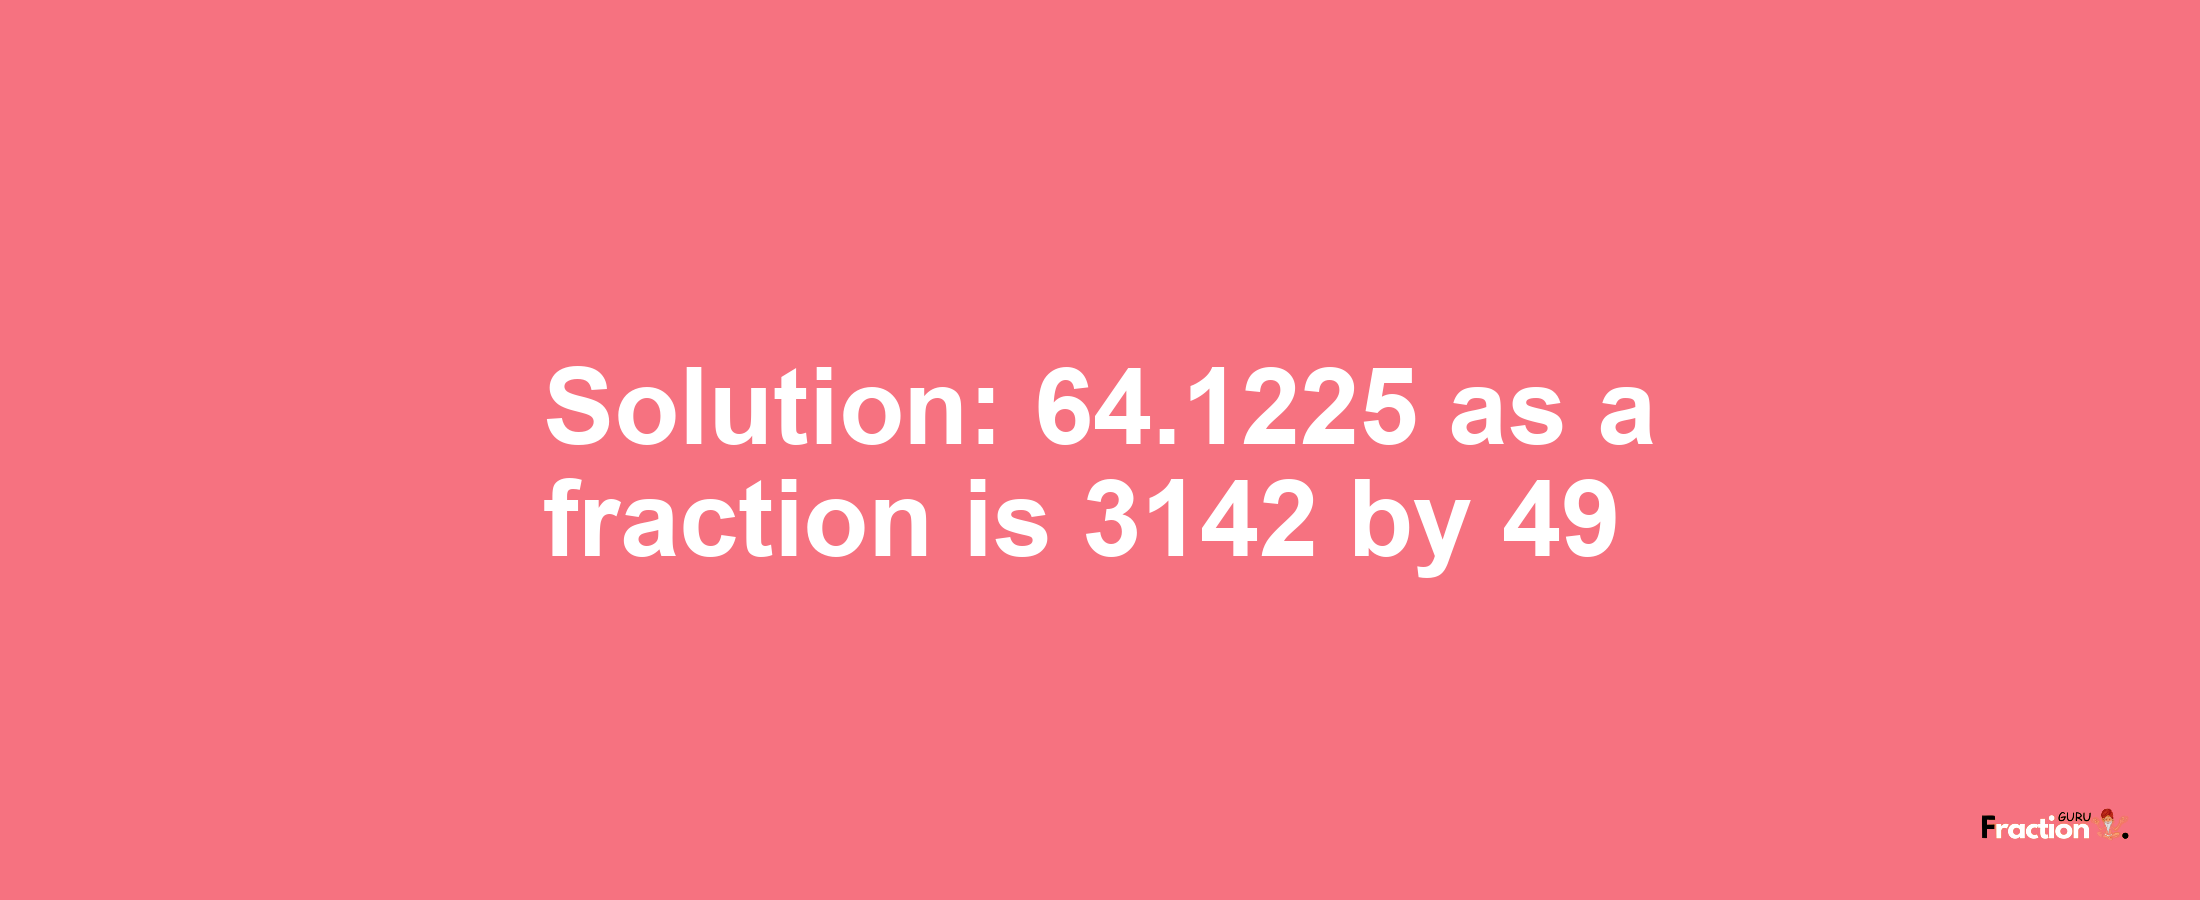 Solution:64.1225 as a fraction is 3142/49